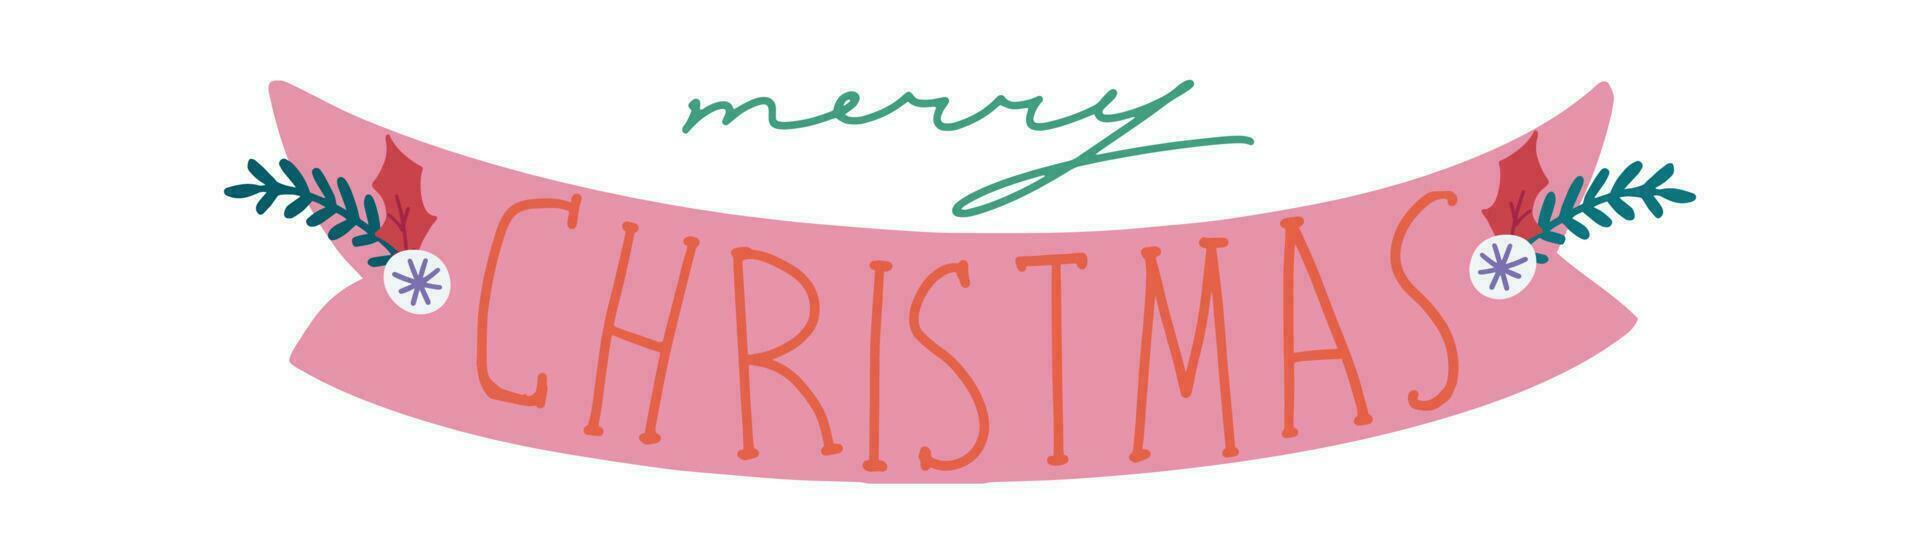 Hand drawn ribbon or label. Merry christmas lettering for decoration vector